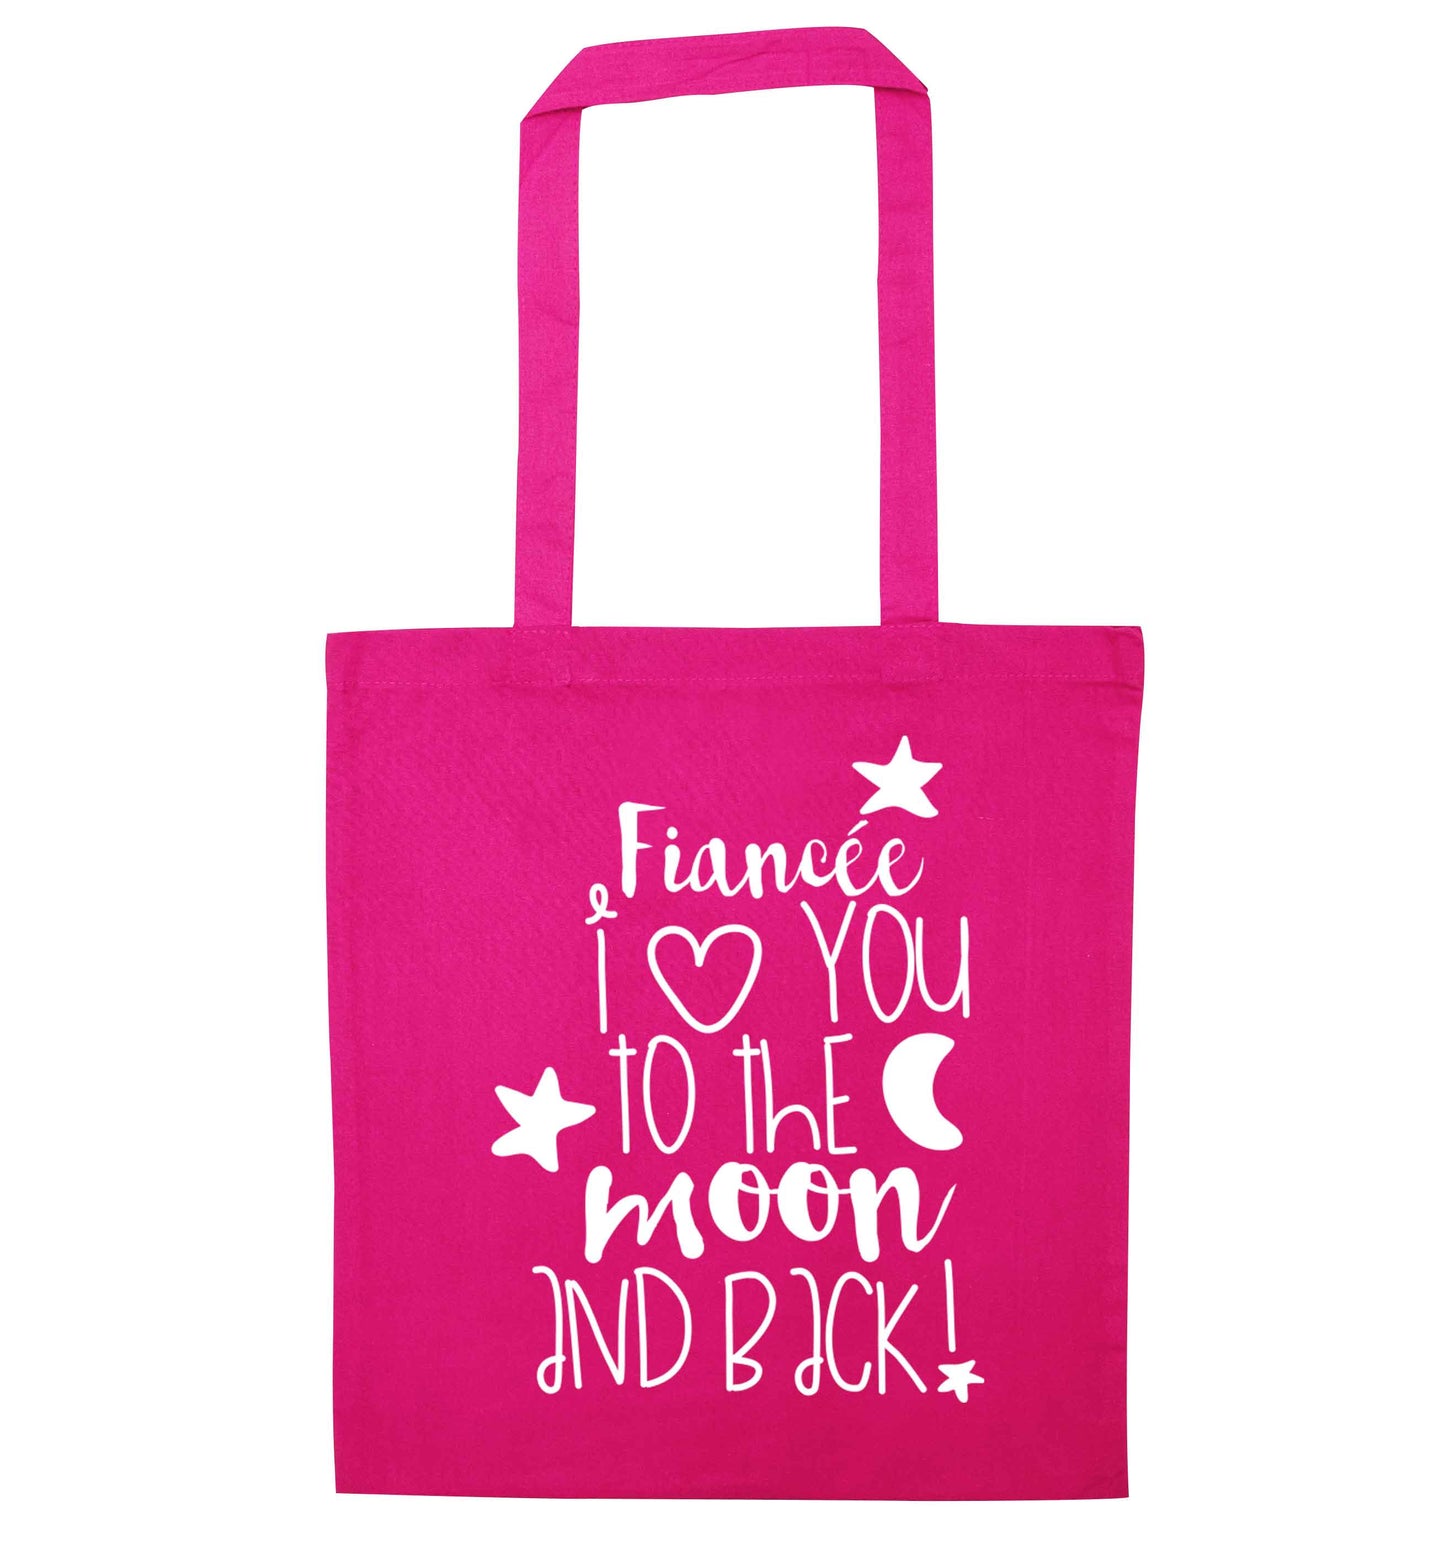 Fiancée I love you to the moon and back pink tote bag